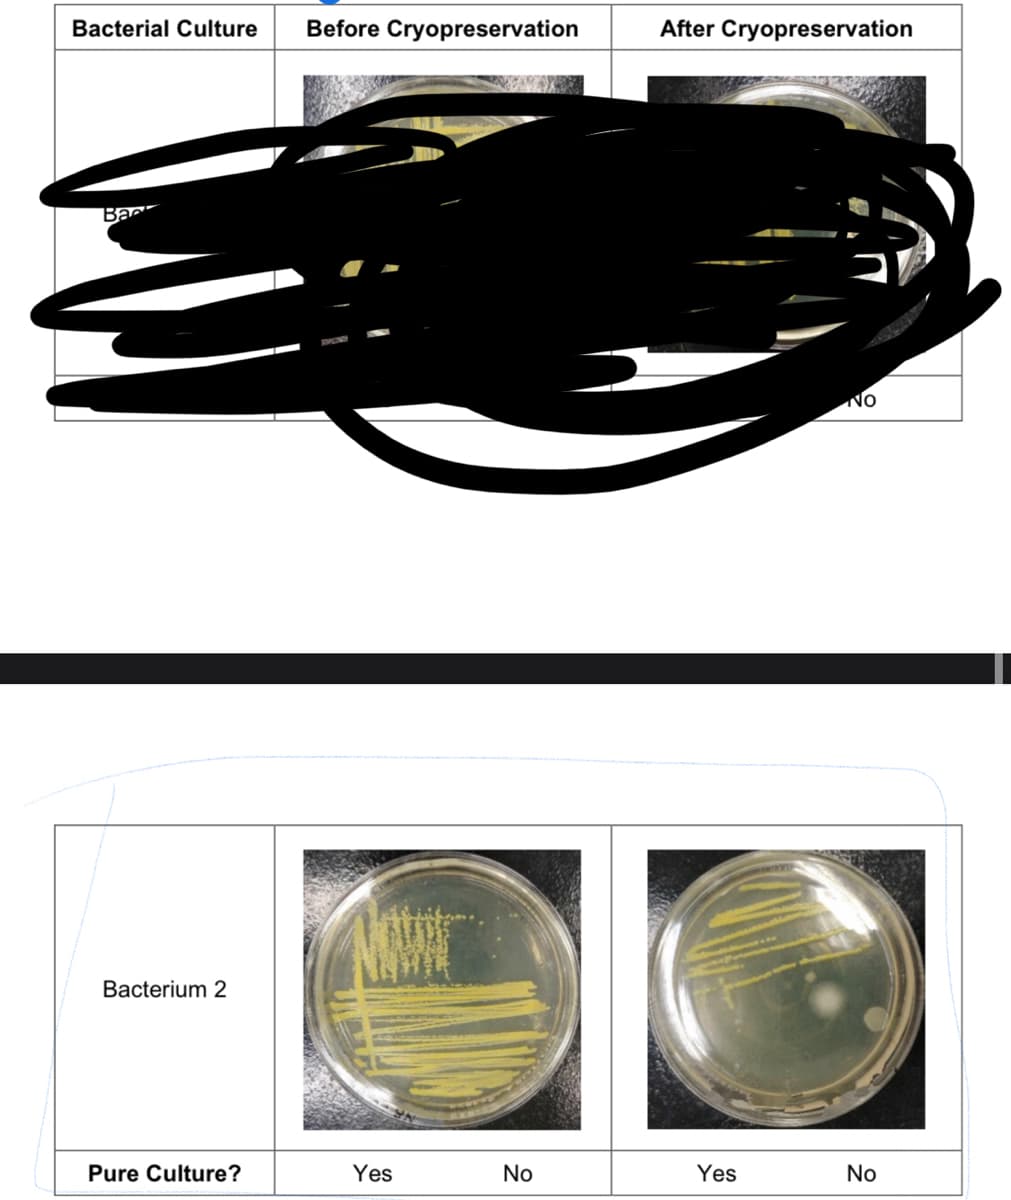 Bacterial Culture
Back
Bacterium 2
Pure Culture?
Before Cryopreservation
Yes
No
After Cryopreservation
Yes
No